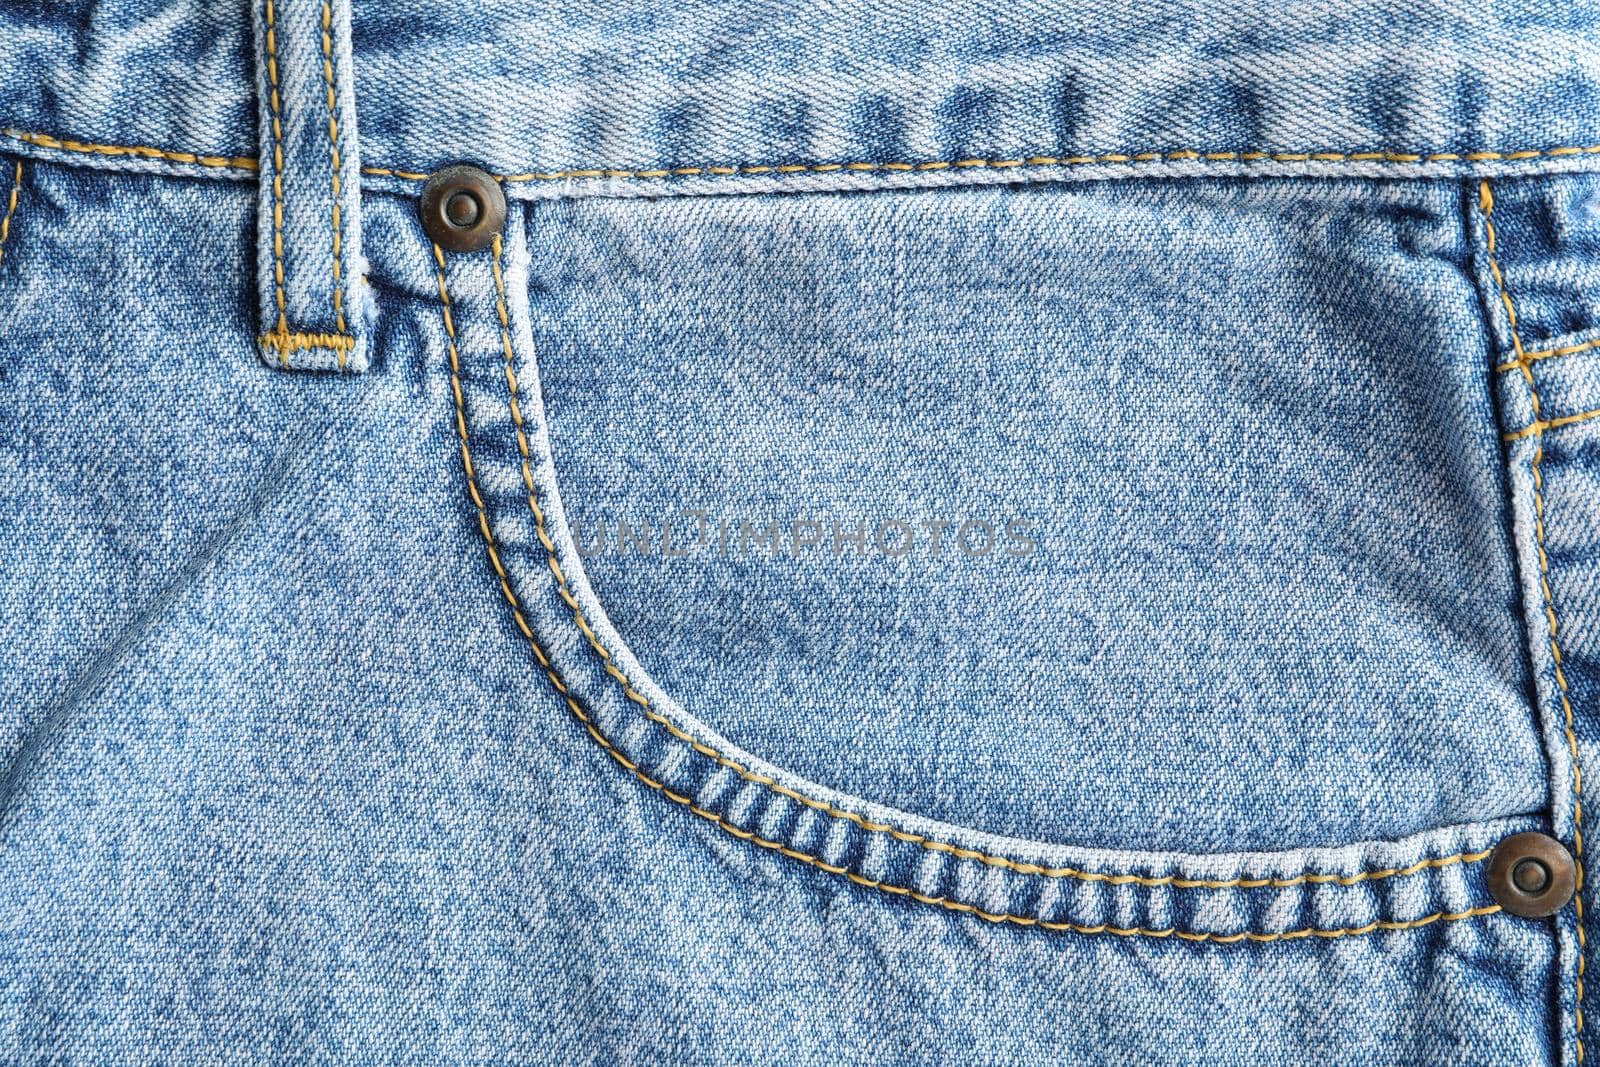 Classic jeans textured background, close up